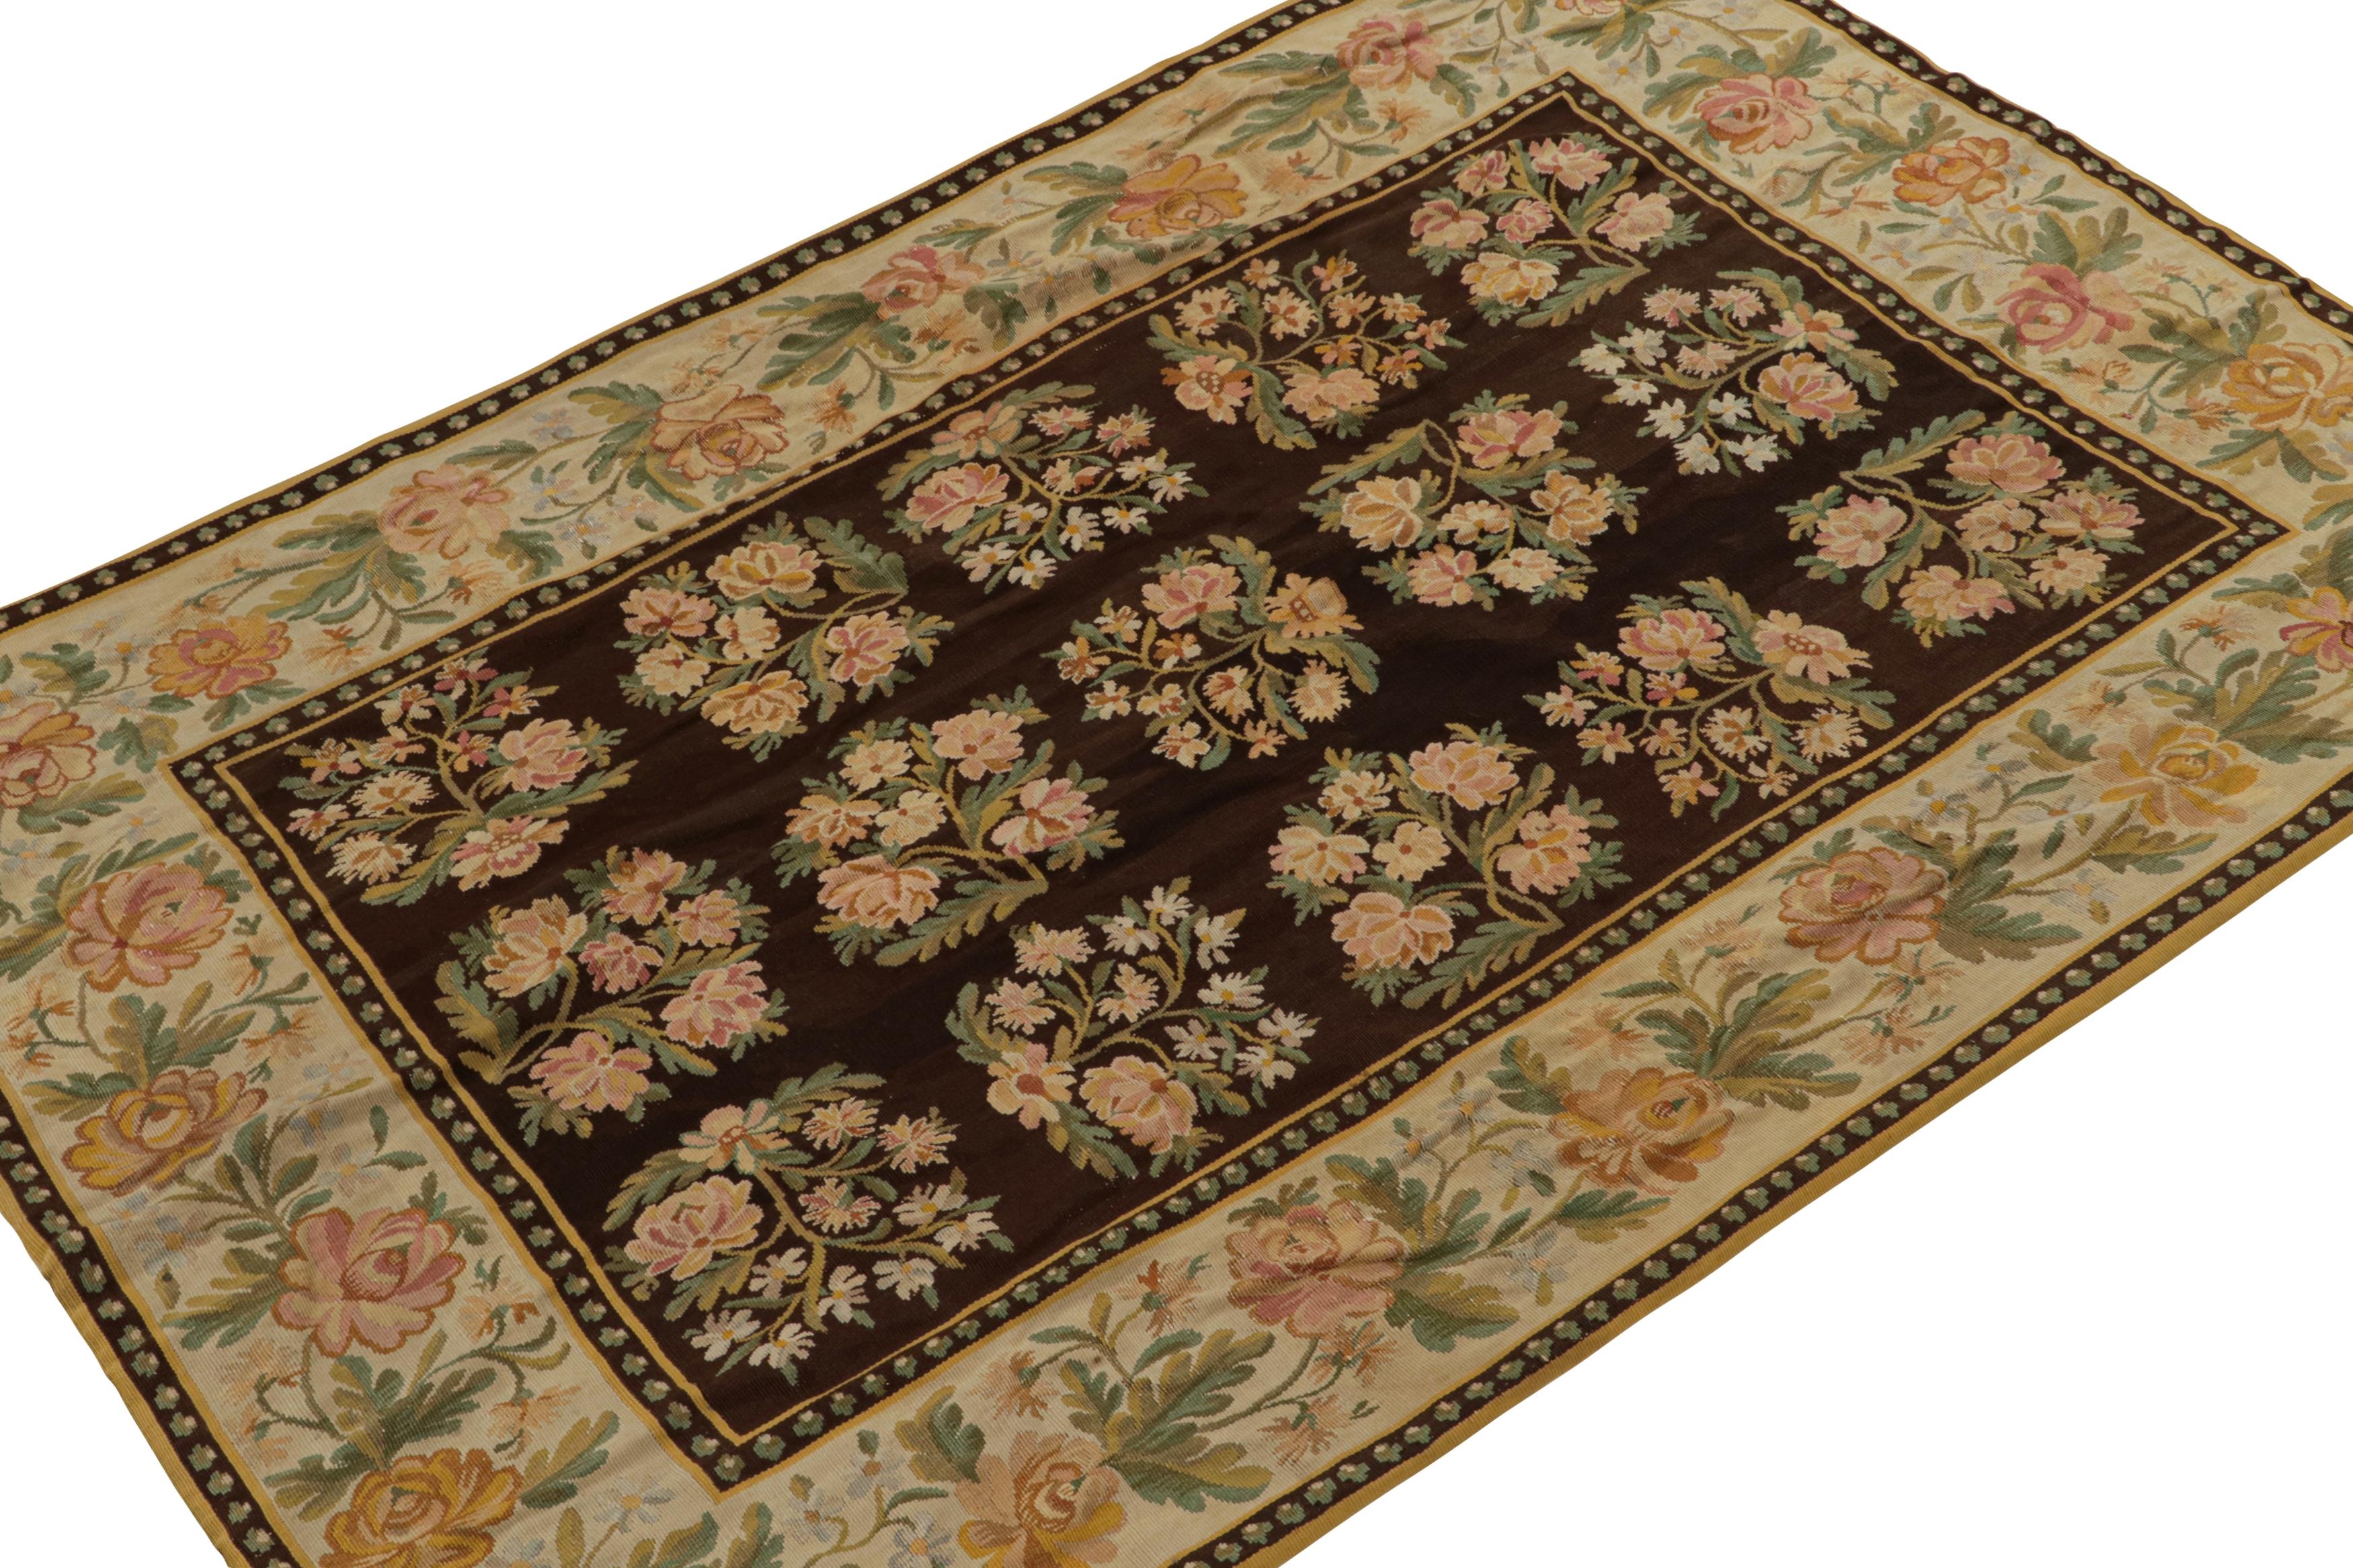 Handwoven in wool, this rare 5x8 antique Bessarabian kilim rug is believed to originate from Romania circa 1850-1860. Its design features a wide beige border around a rich chocolate brown field, with floral patterns in soft colors. 

On the design: